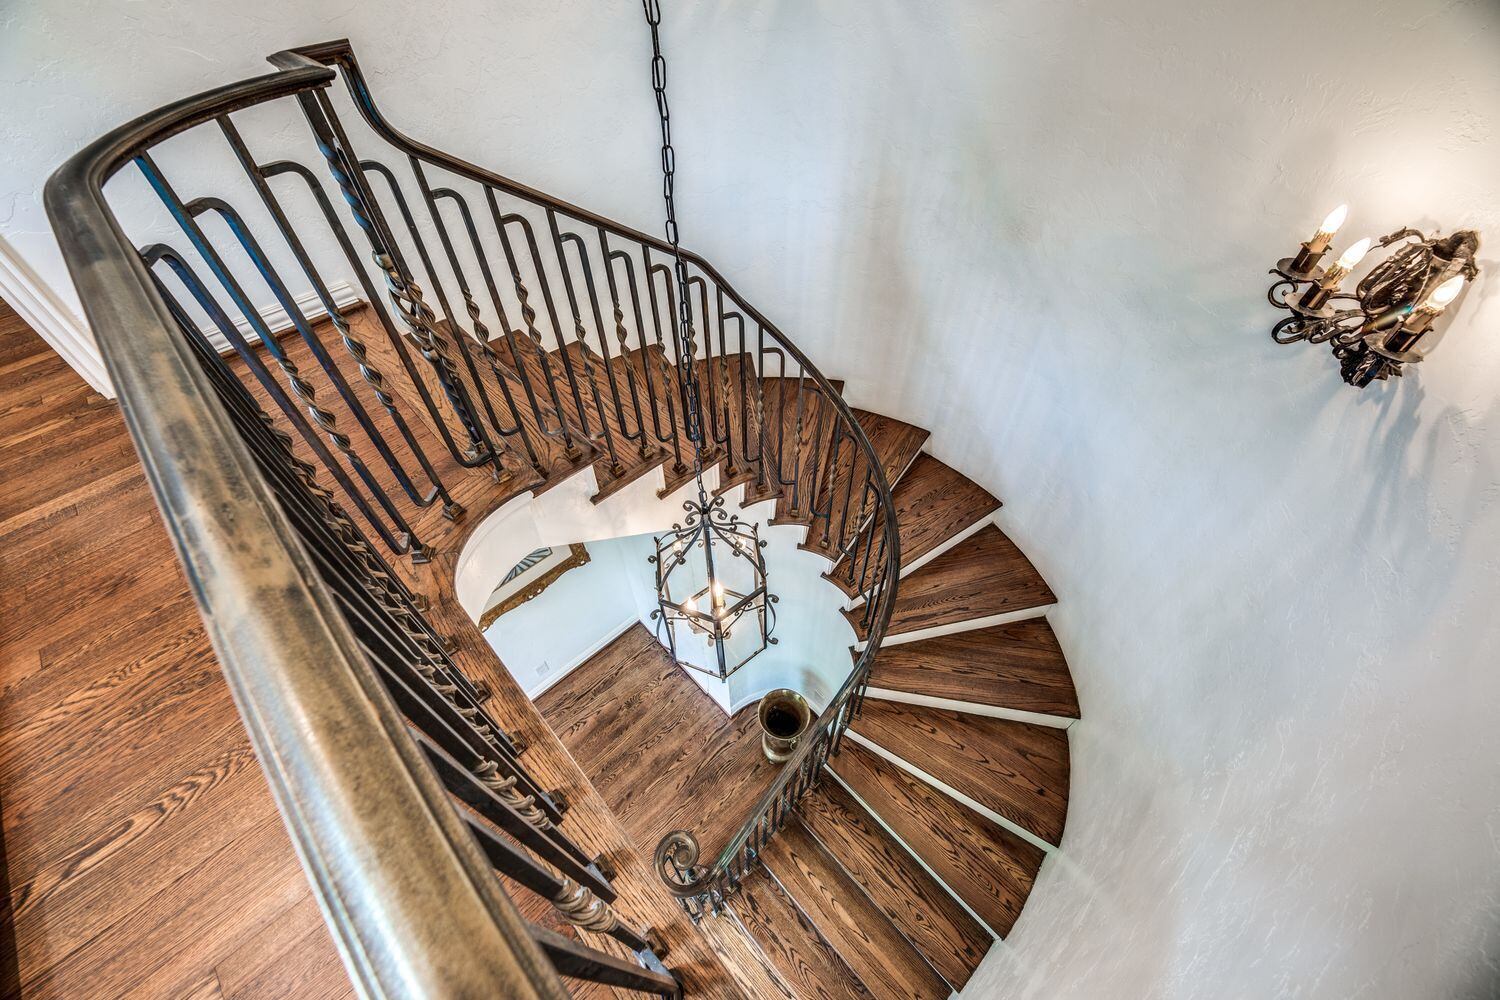 Take a look at the winding staircase inside Adam Saxton and Dan Murphy's nearly 100-year-old...